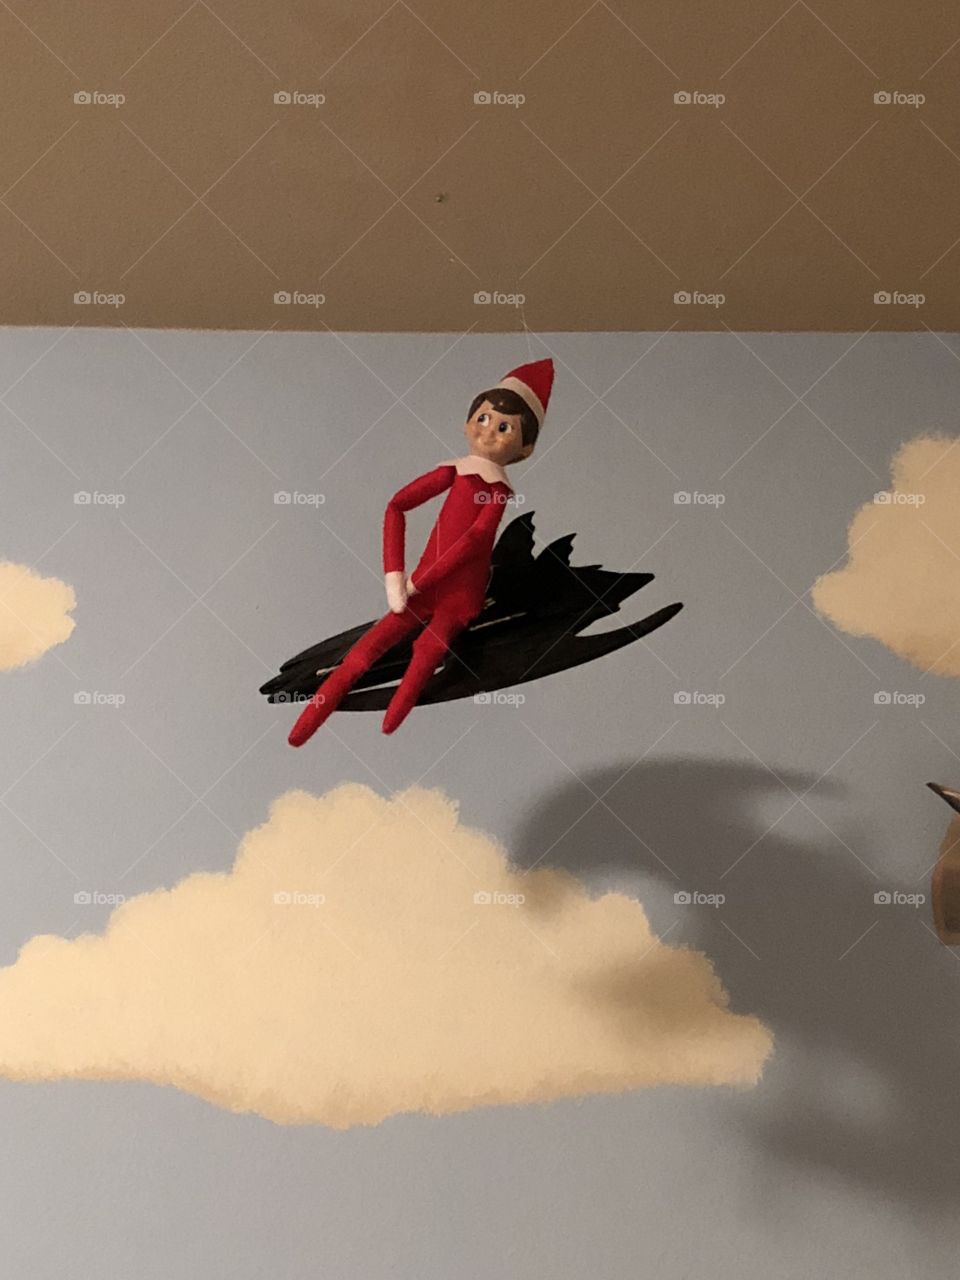 Elf on the shelf decided to hitch a ride with Batman to the north pole!  A child’s Eld on the Shelf sits on his toy Bat plane hanging from his rooms ceiling.